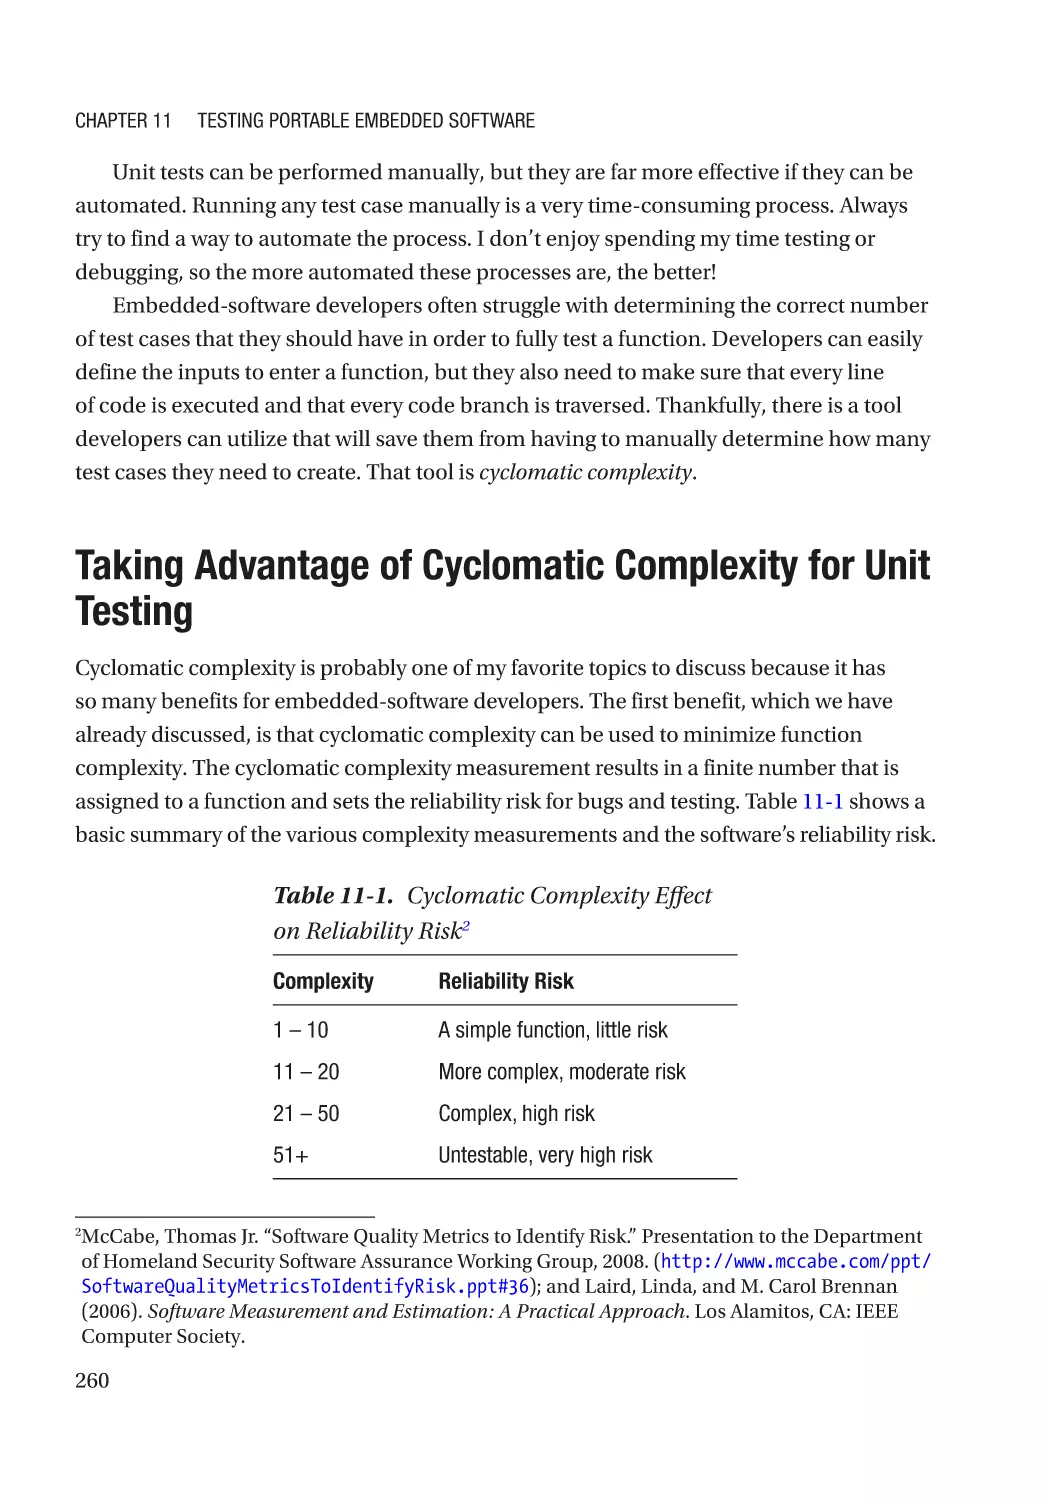 Taking Advantage of Cyclomatic Complexity for Unit Testing